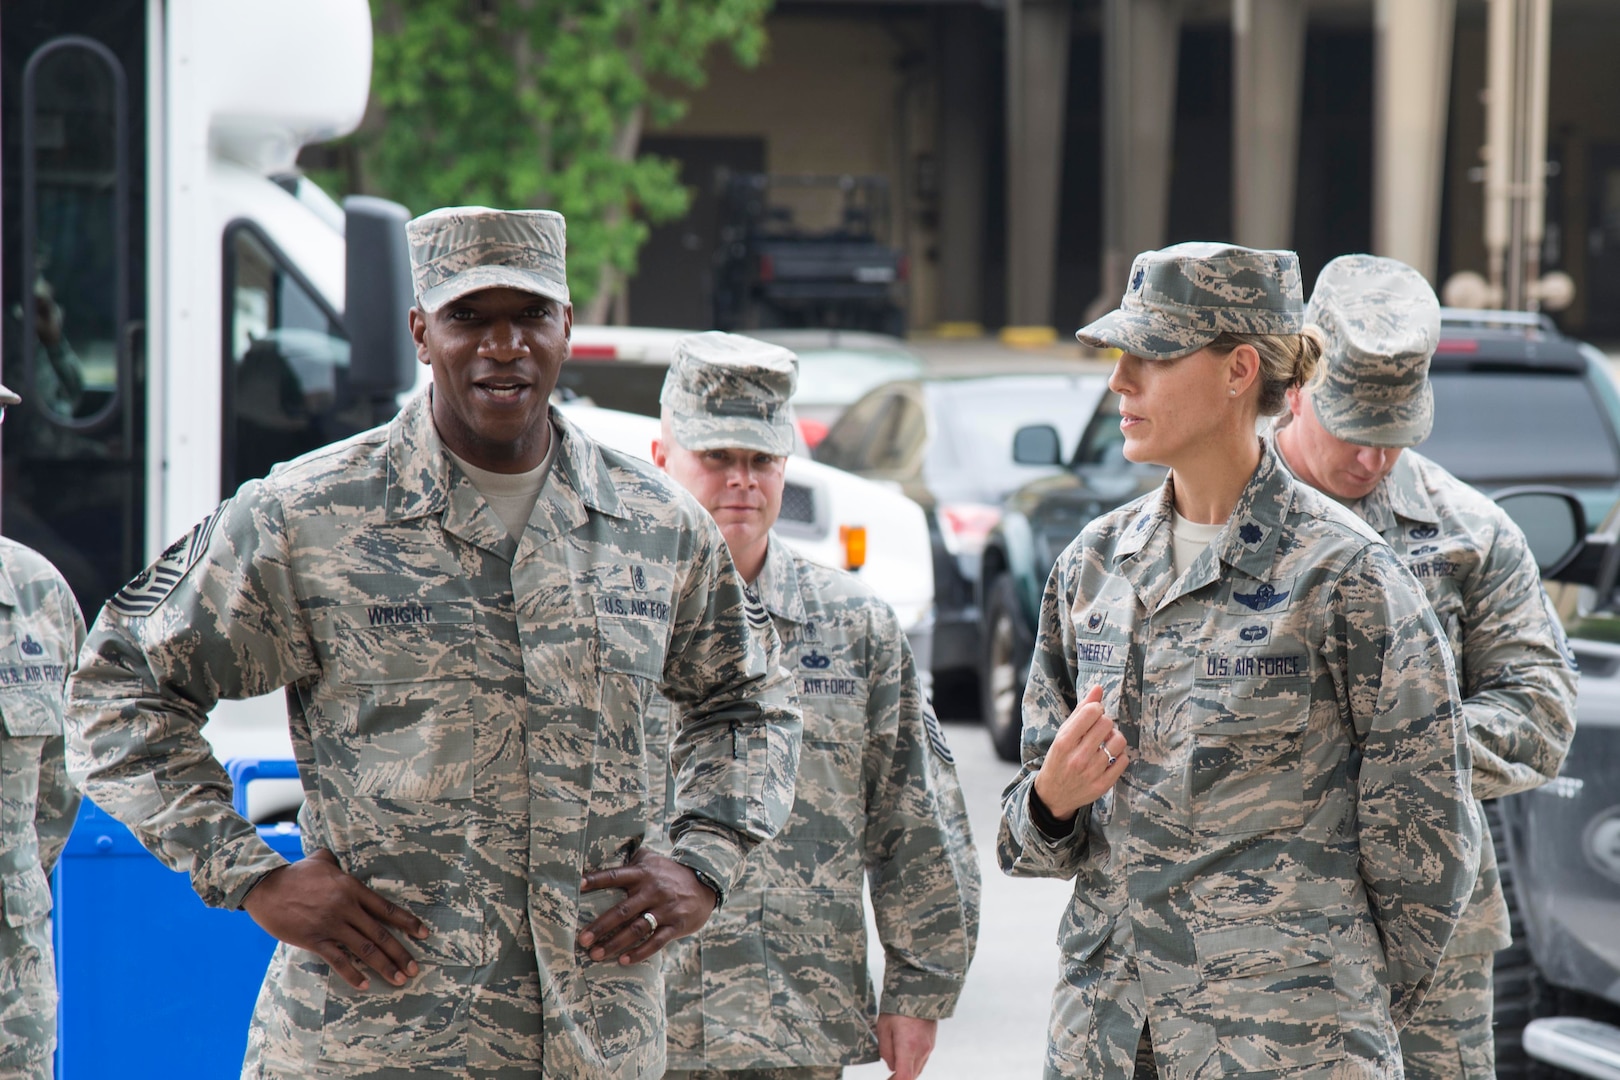 Chief Master Sgt. of the Air Force Kaleth O. Wright speaks with Lt. Col. Meghan
Doherty, 326th Training Squadron commander, as he tours Airmen’s Week facilities
May 3, 2017, at Joint Base San Antonio-Lackland, Texas. During Airmen’s Week, a
graduated class of 700-900 new Airmen are broken down into small groups and
taught how to apply Air Force core values to real-world situations and develop
professional, resilient Airmen, inspired by Air Force heritage, committed to the Air
Force Core Values and motivated to deliver Airpower for America. (U.S. Air Force
photo by Airman Dillon Parker)